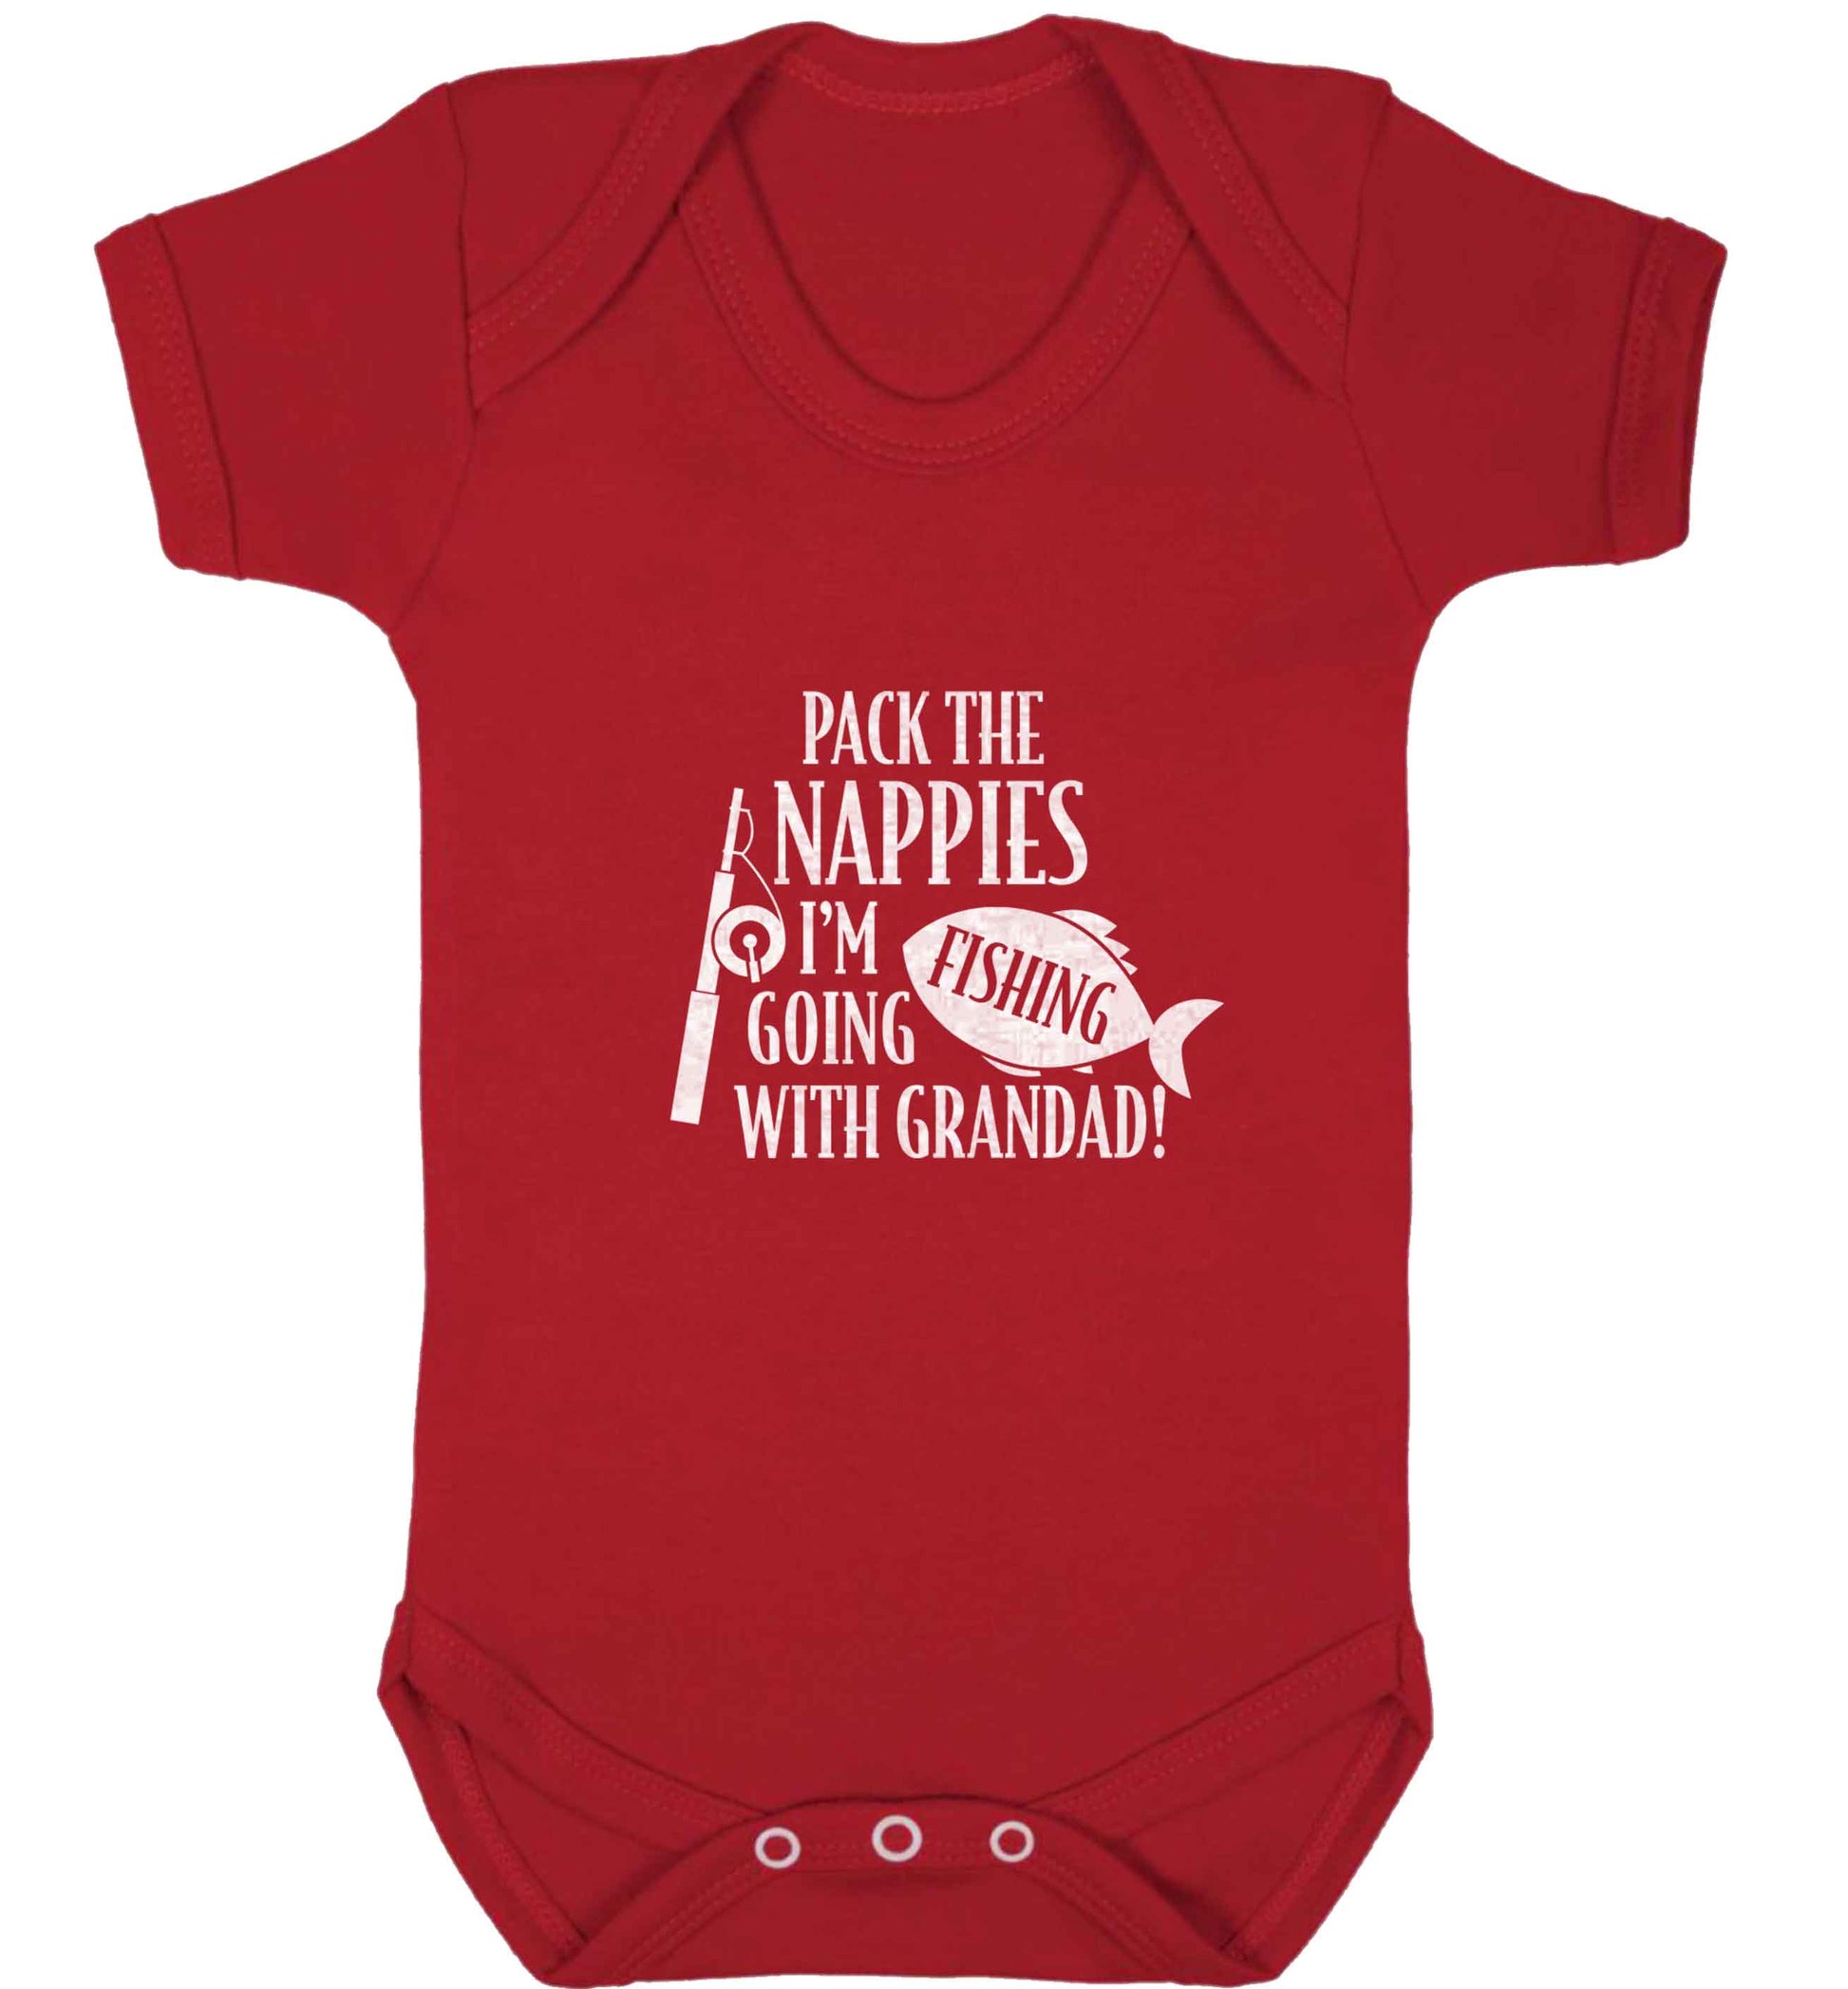 Pack the nappies I'm going fishing with Grandad baby vest red 18-24 months